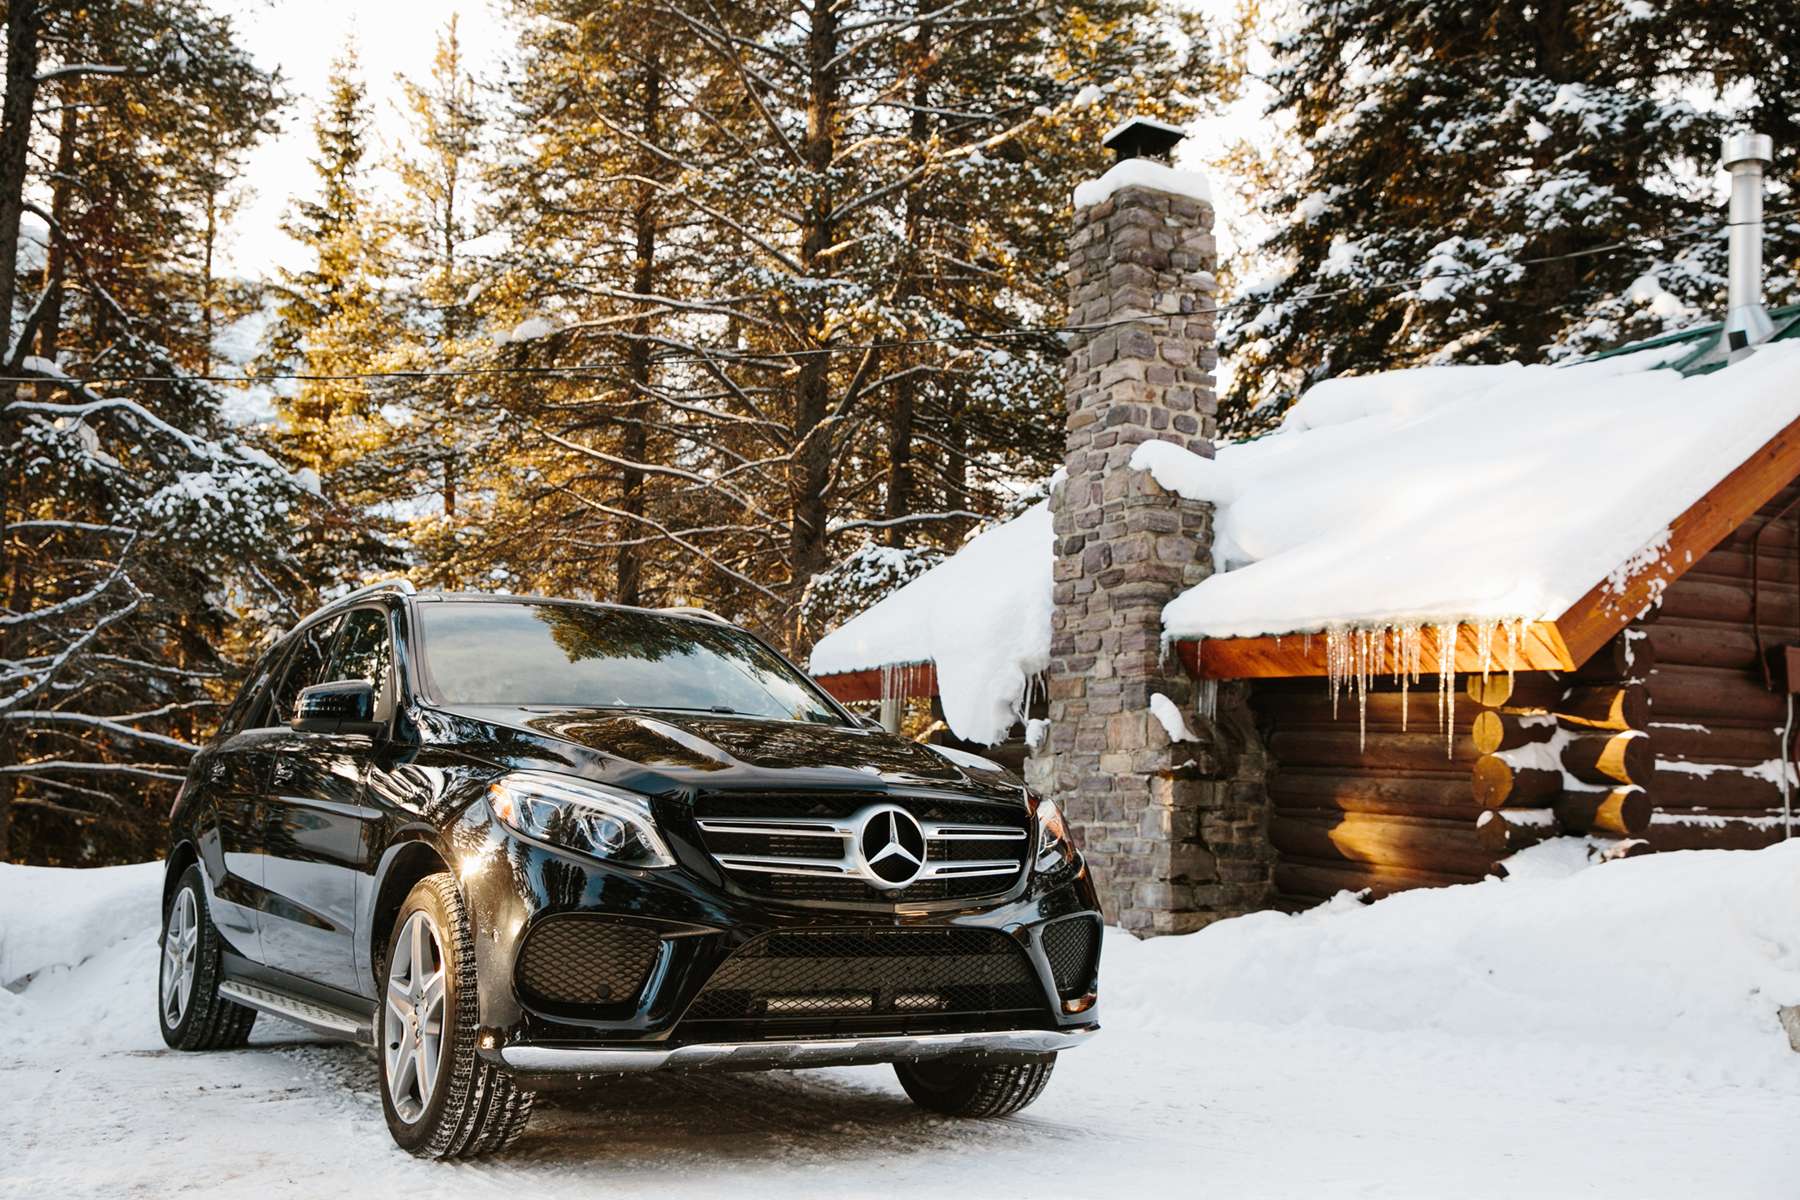 mercedes-benz, commercial photography, great north collective, david guenther, canada